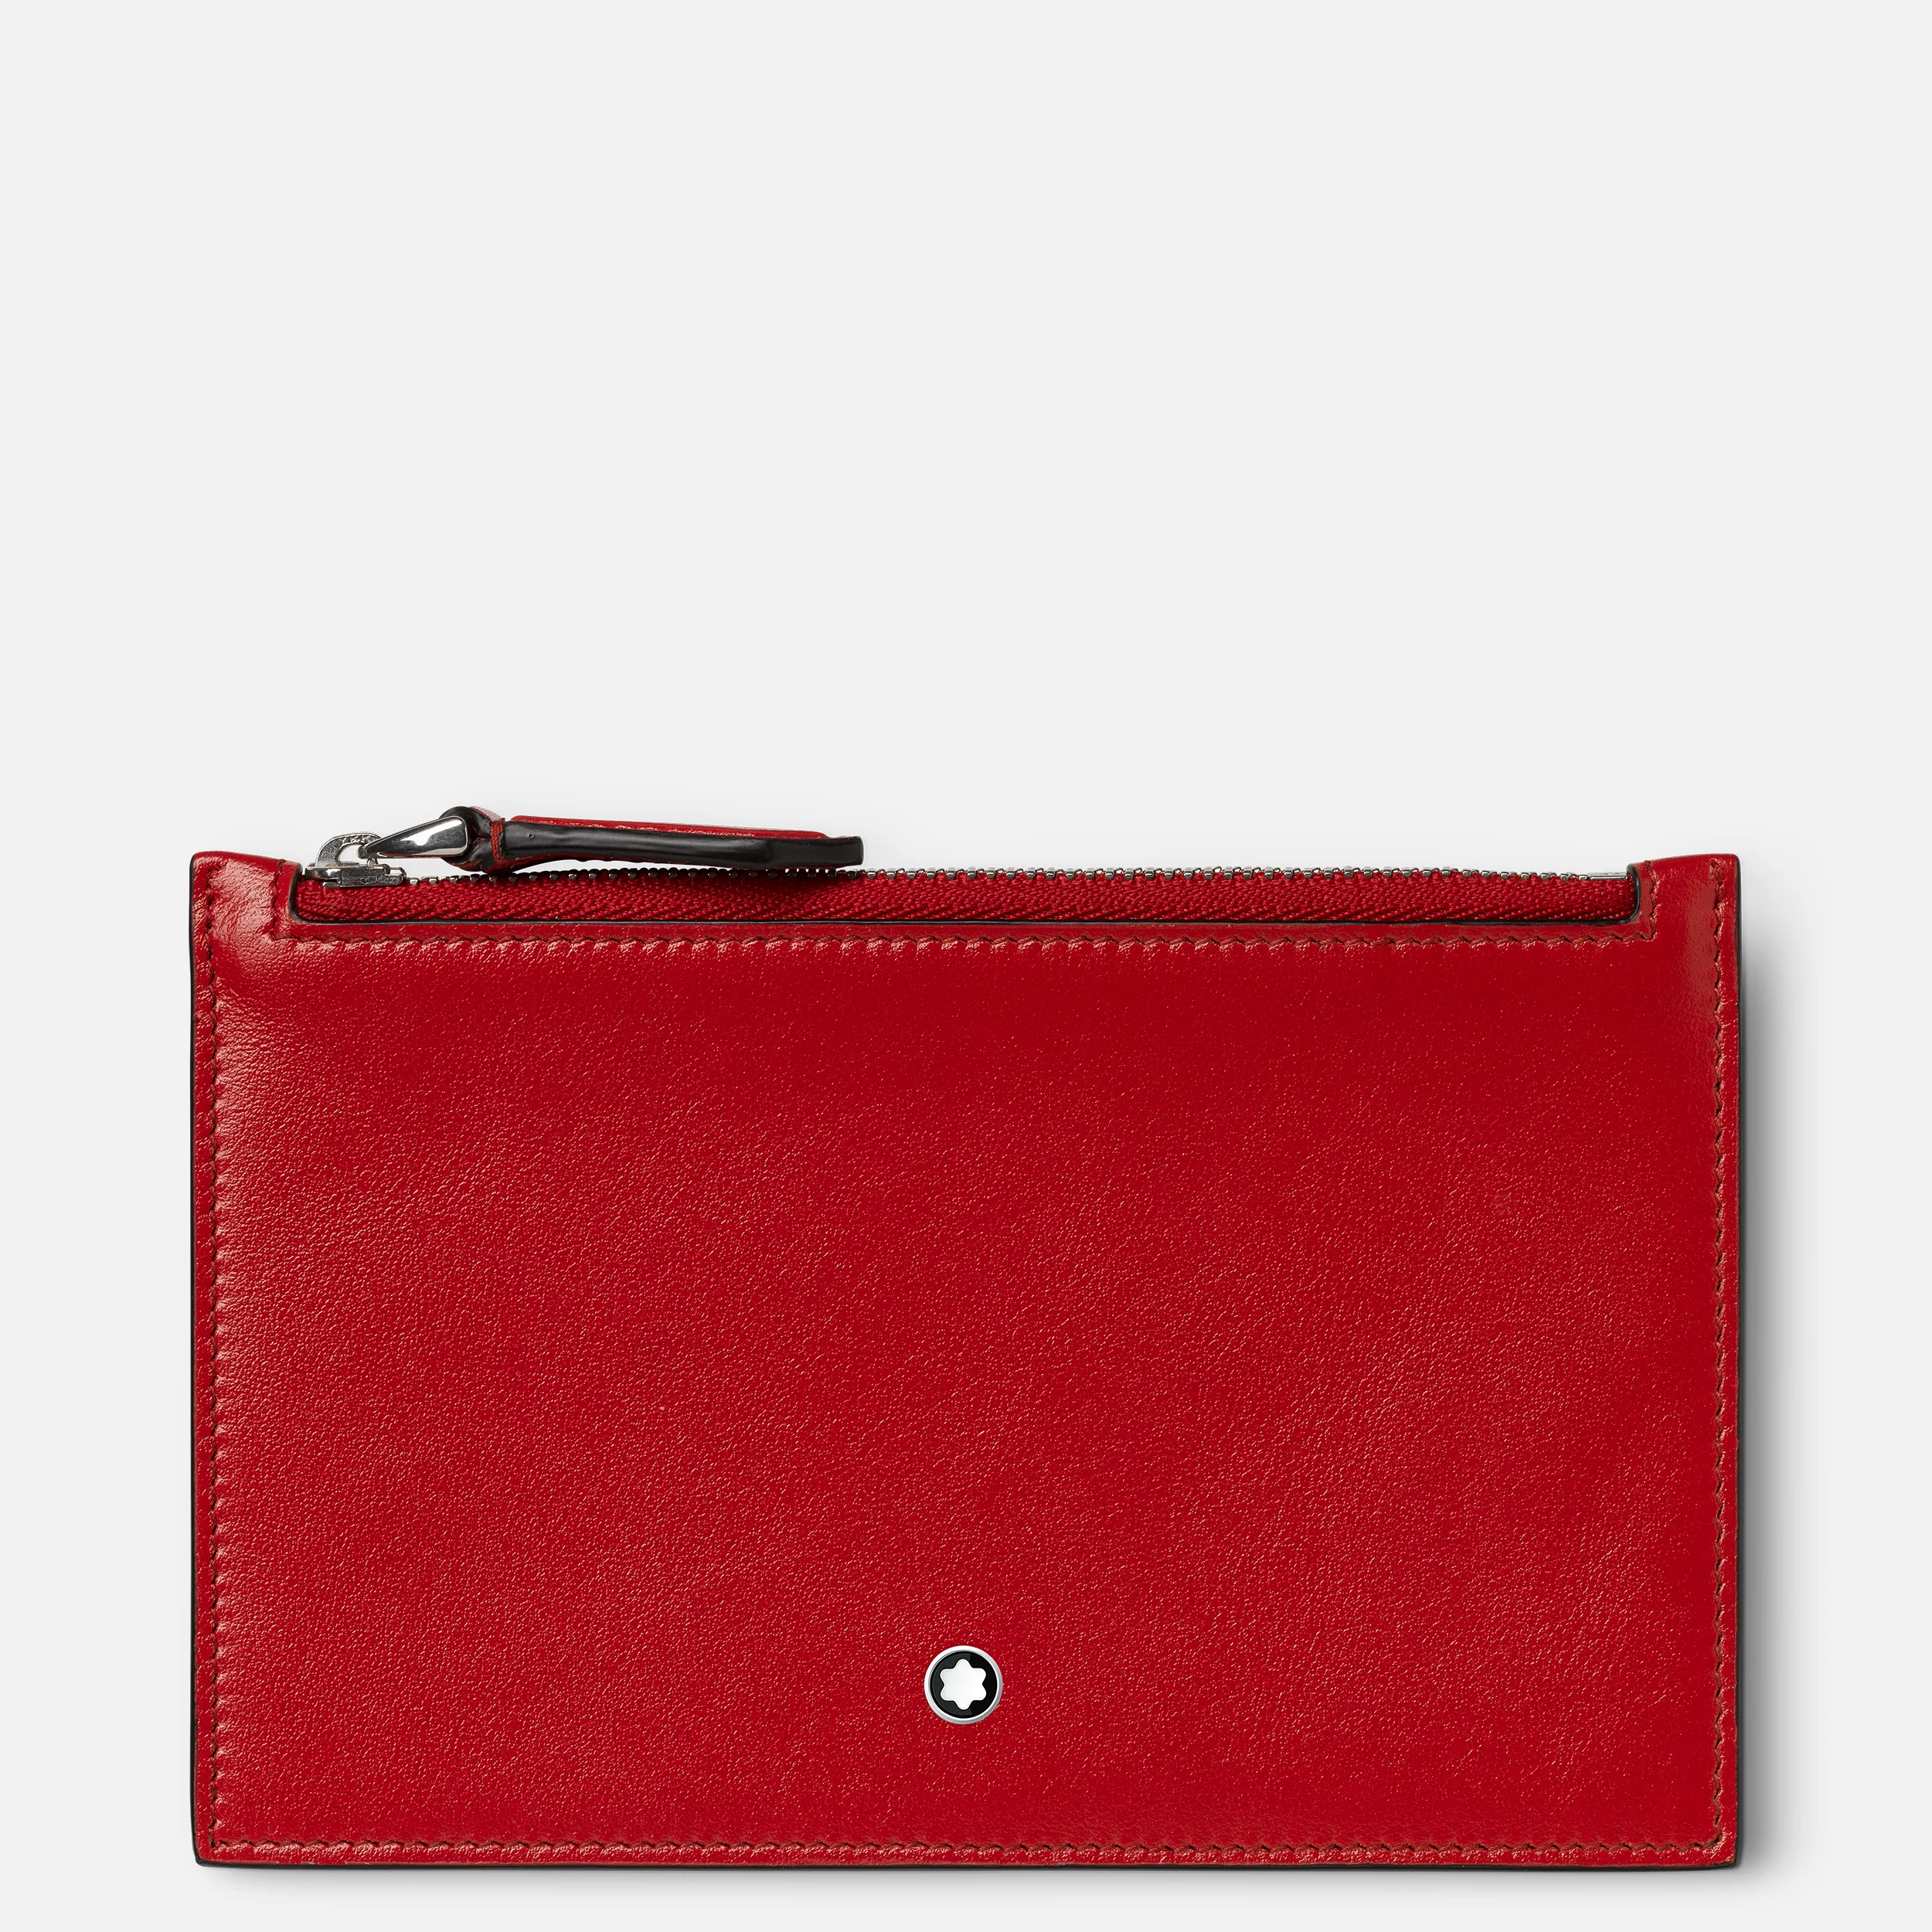 Montblanc Meisterstuck Zipped Card Holder Red - Pencraft the boutique